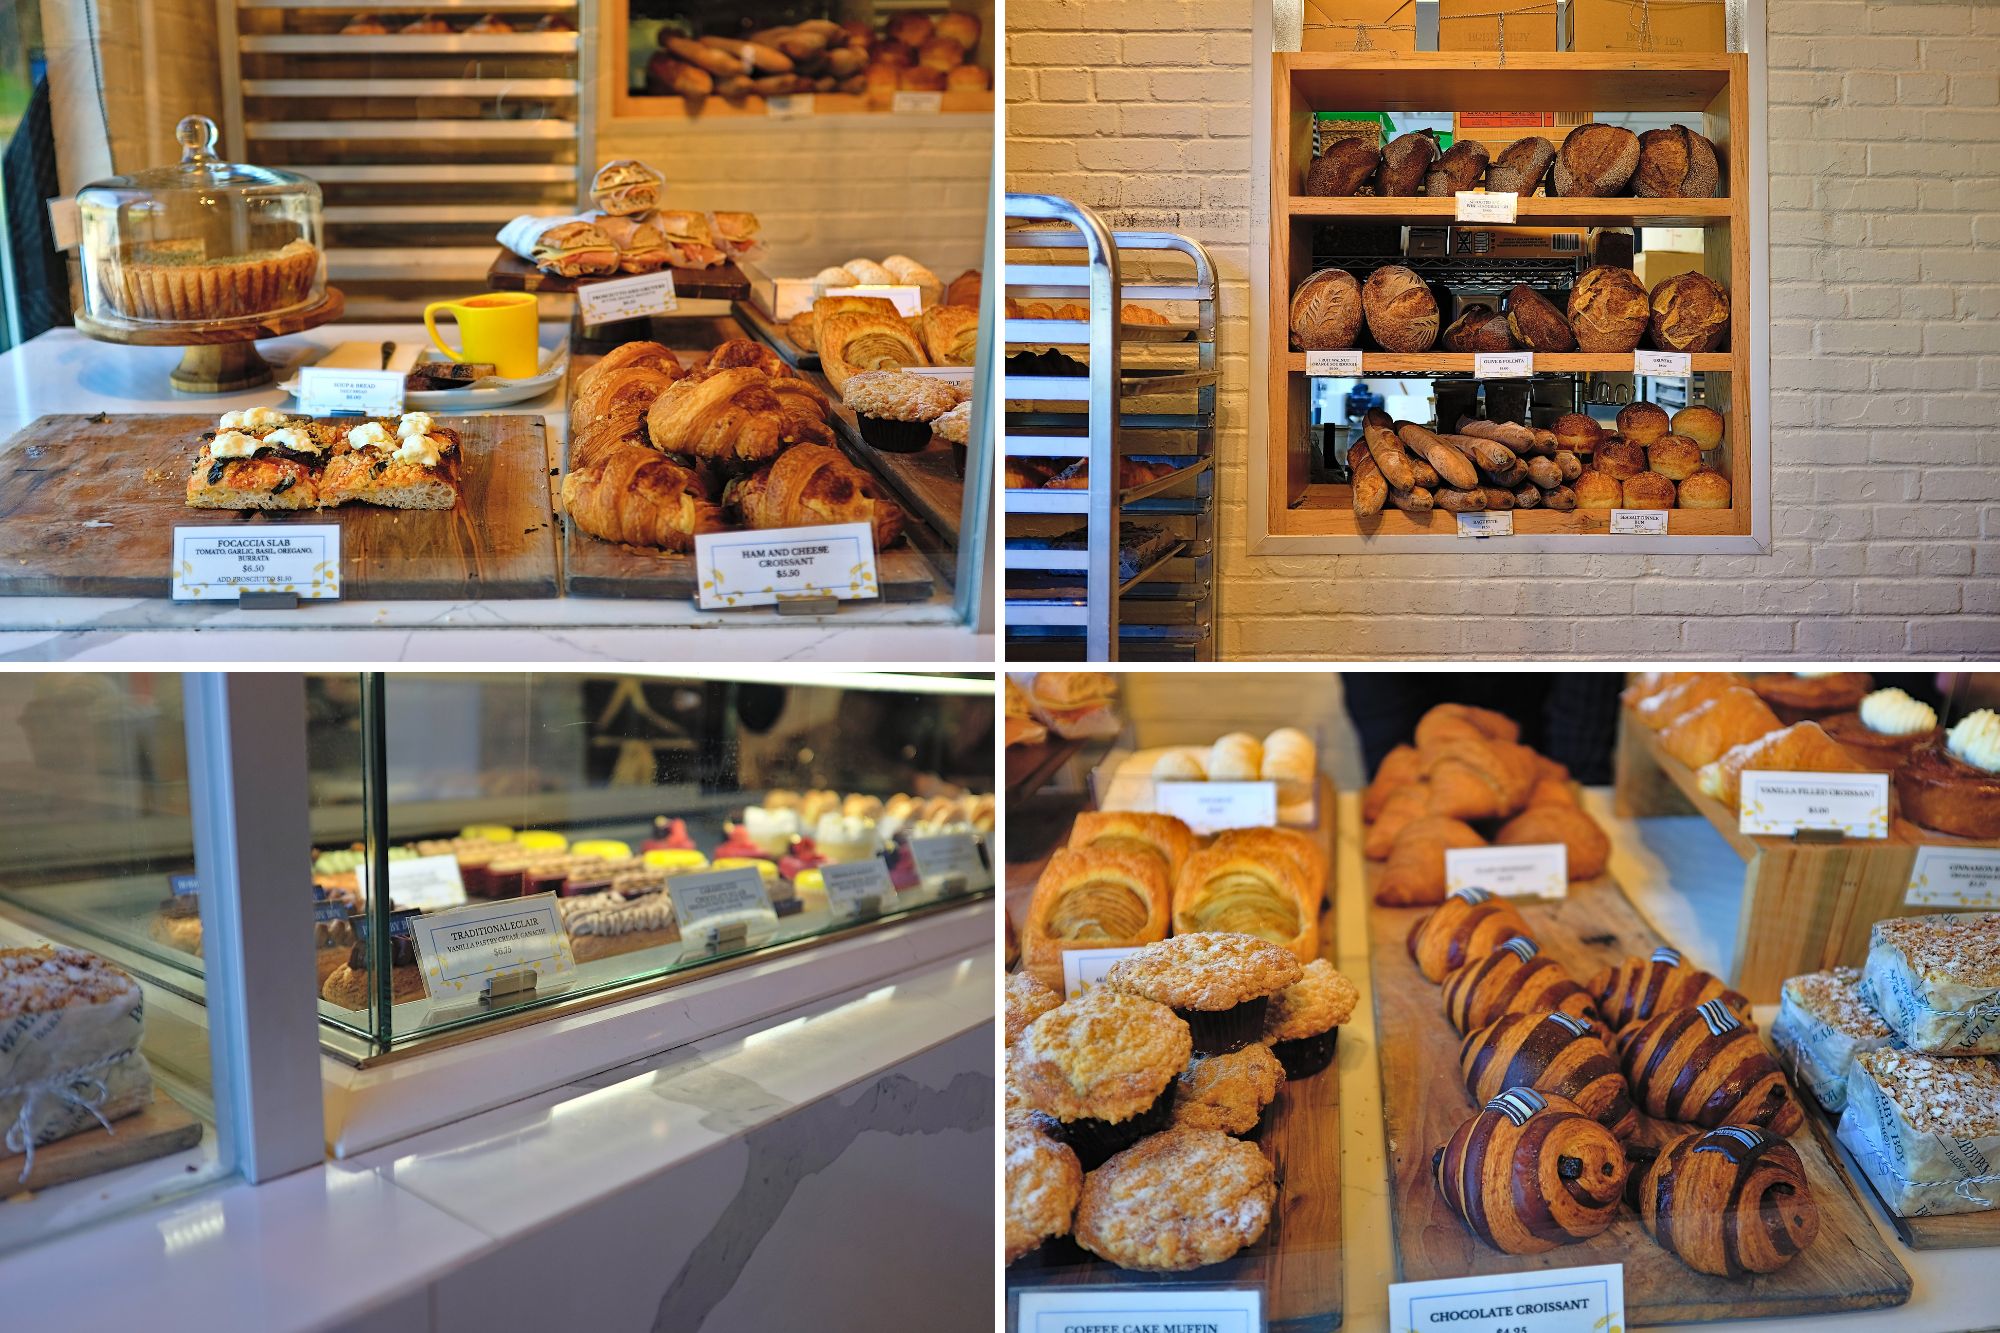 Tempting cases of pastries, breads, and sweets from Bobby Boy Bakeshop